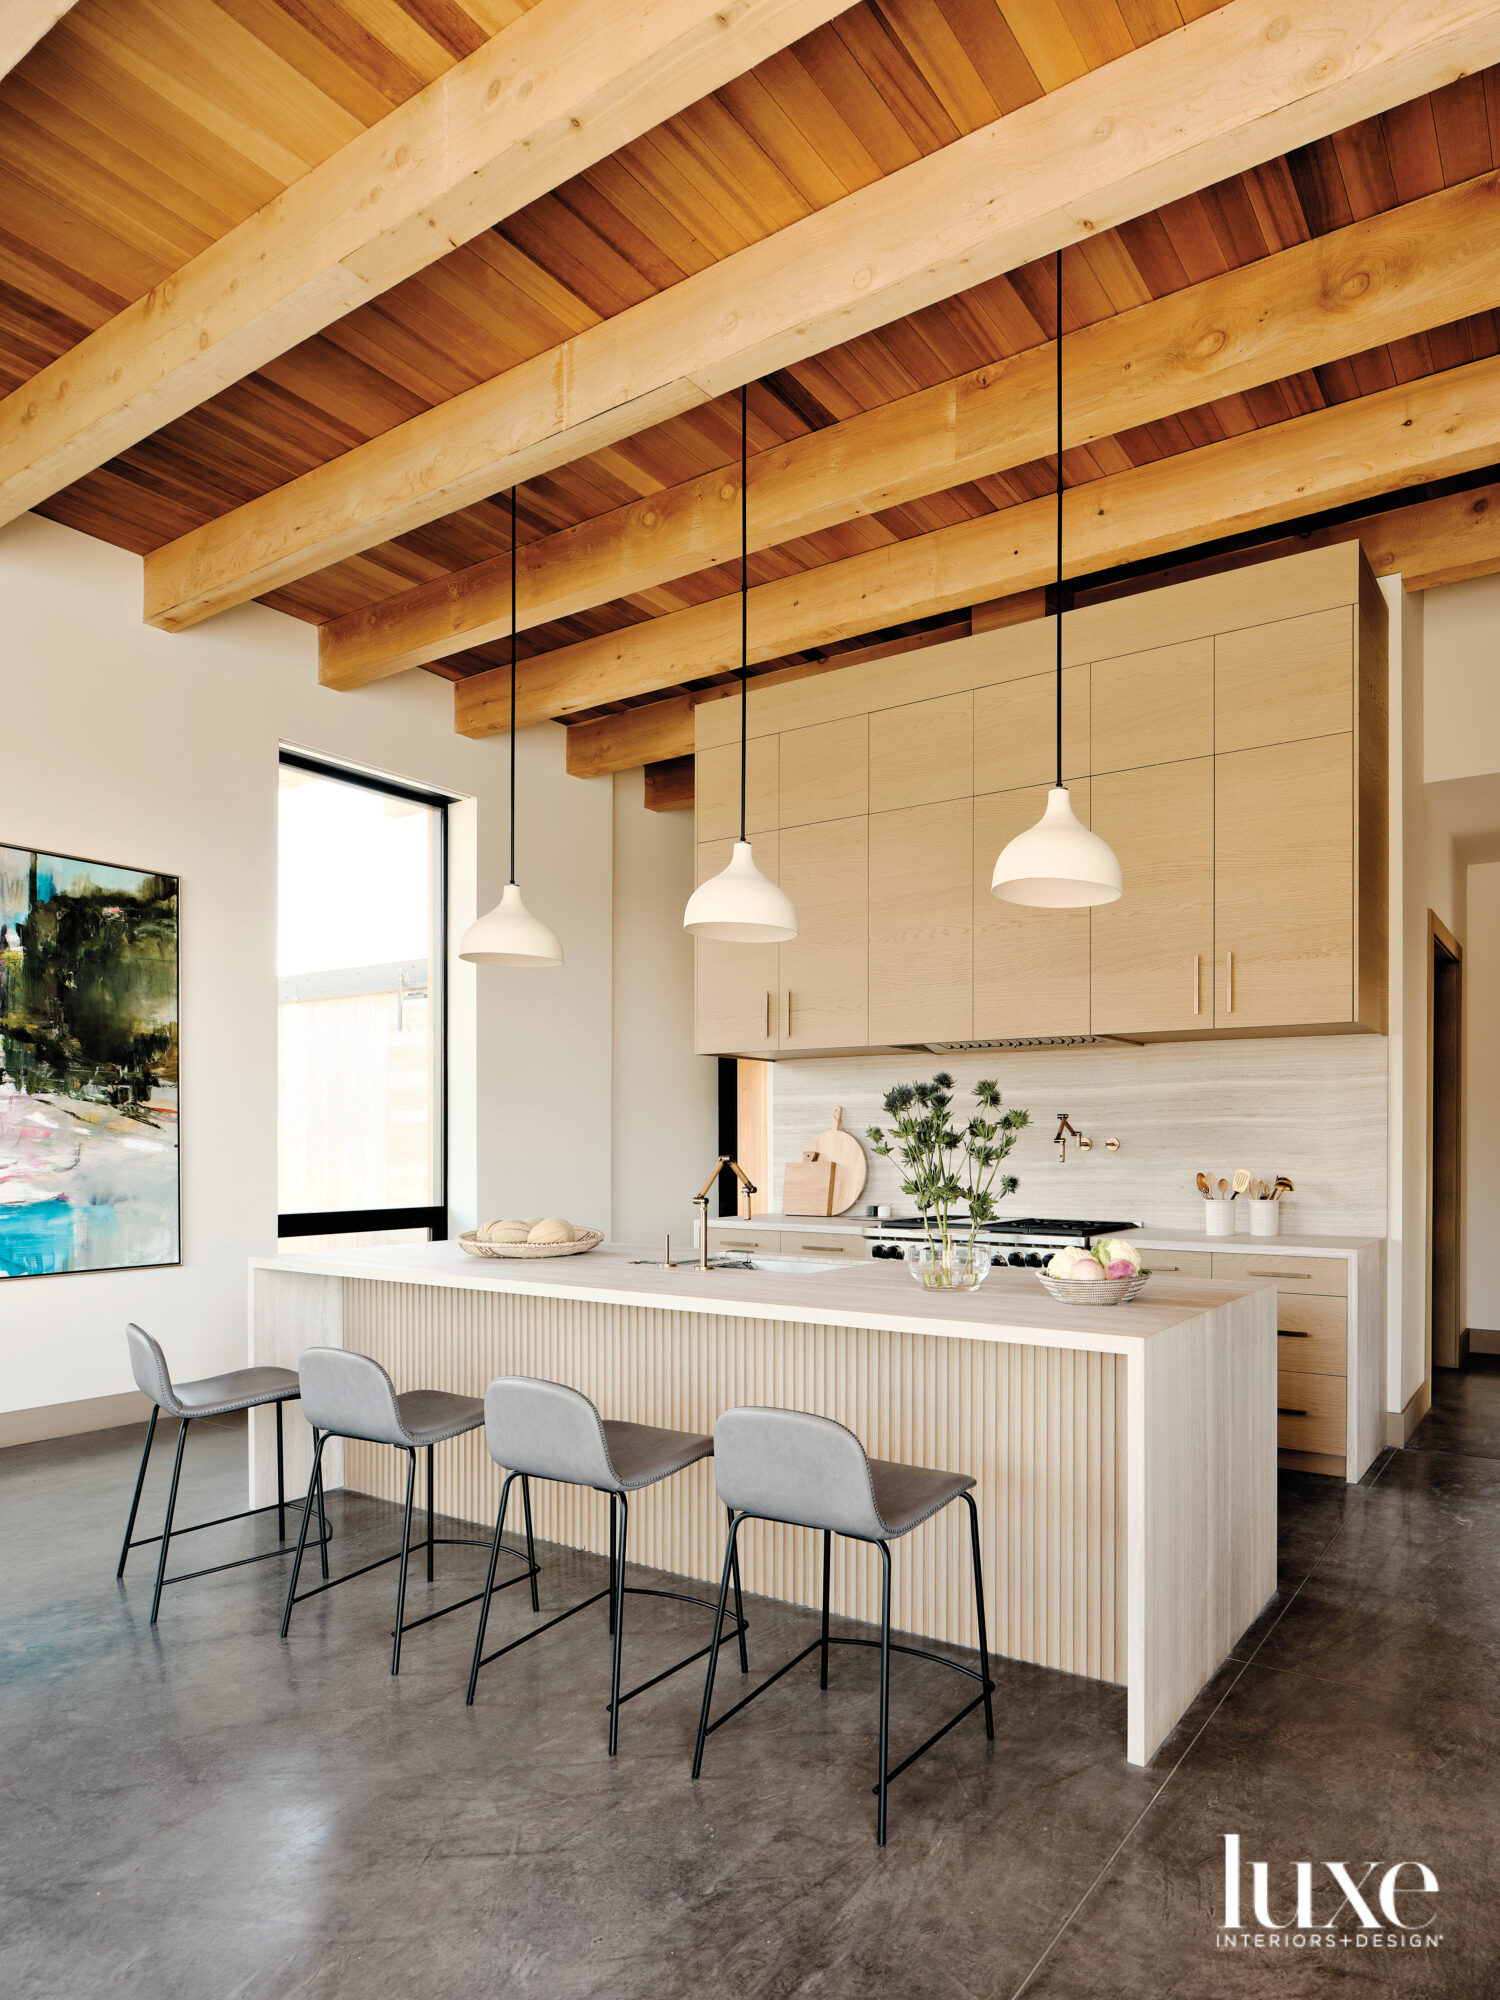 The kitchen has a high, beamed ceiling and light-colored cabinets.